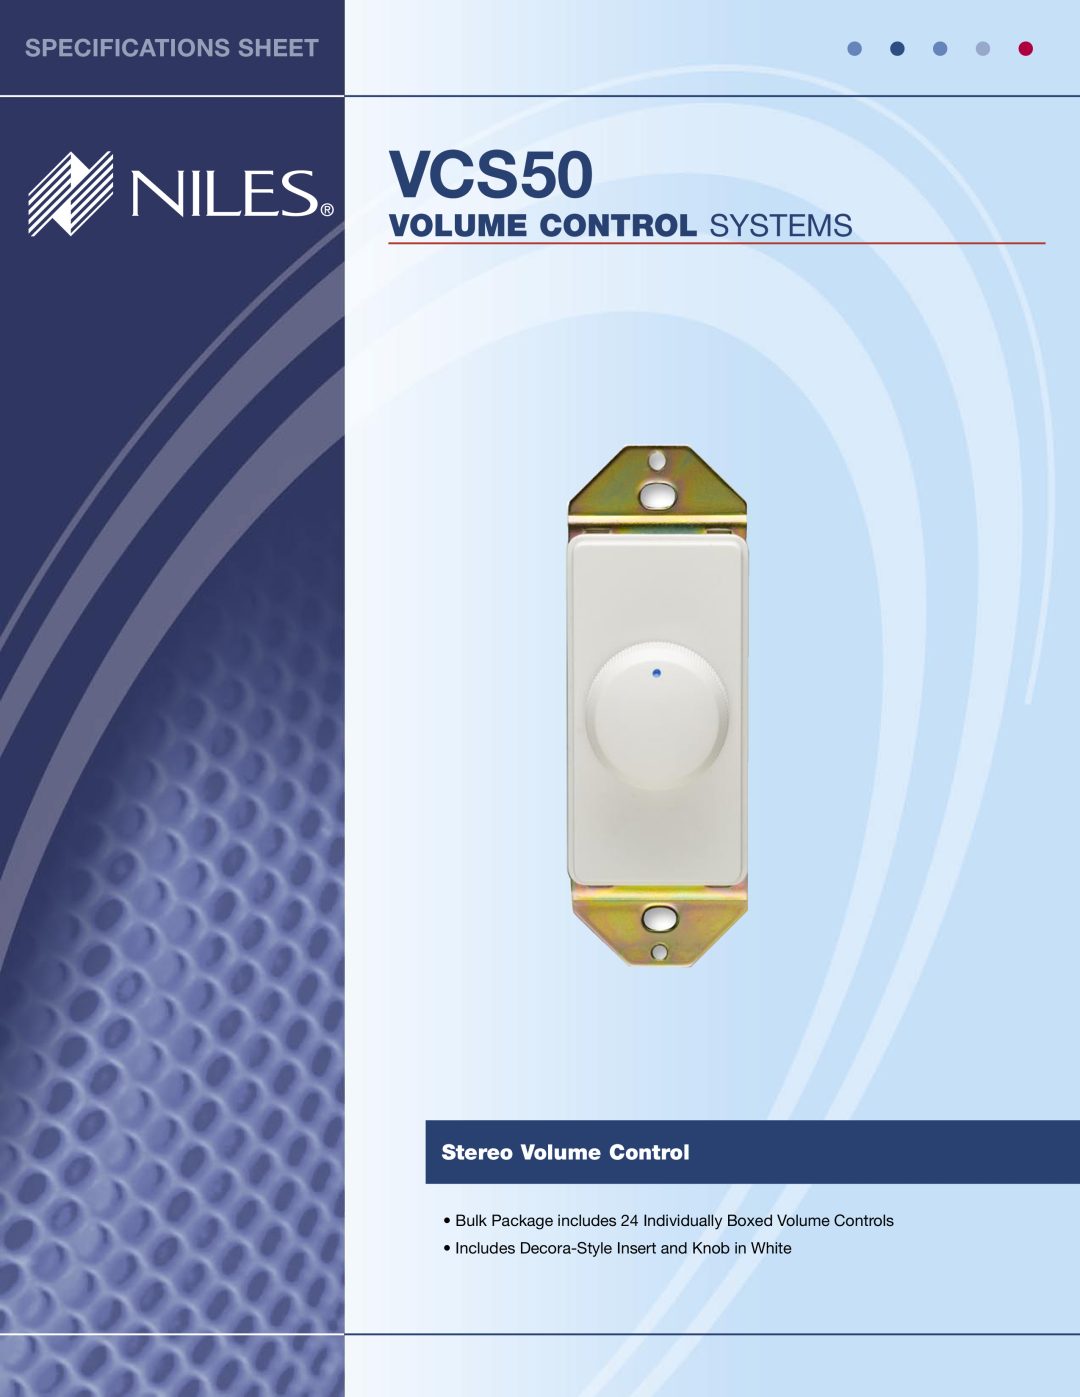 Niles Audio VCS50 specifications Contents, Specifications, Limited Warranty, Stereo Volume Control, Power Handling, e Knob 